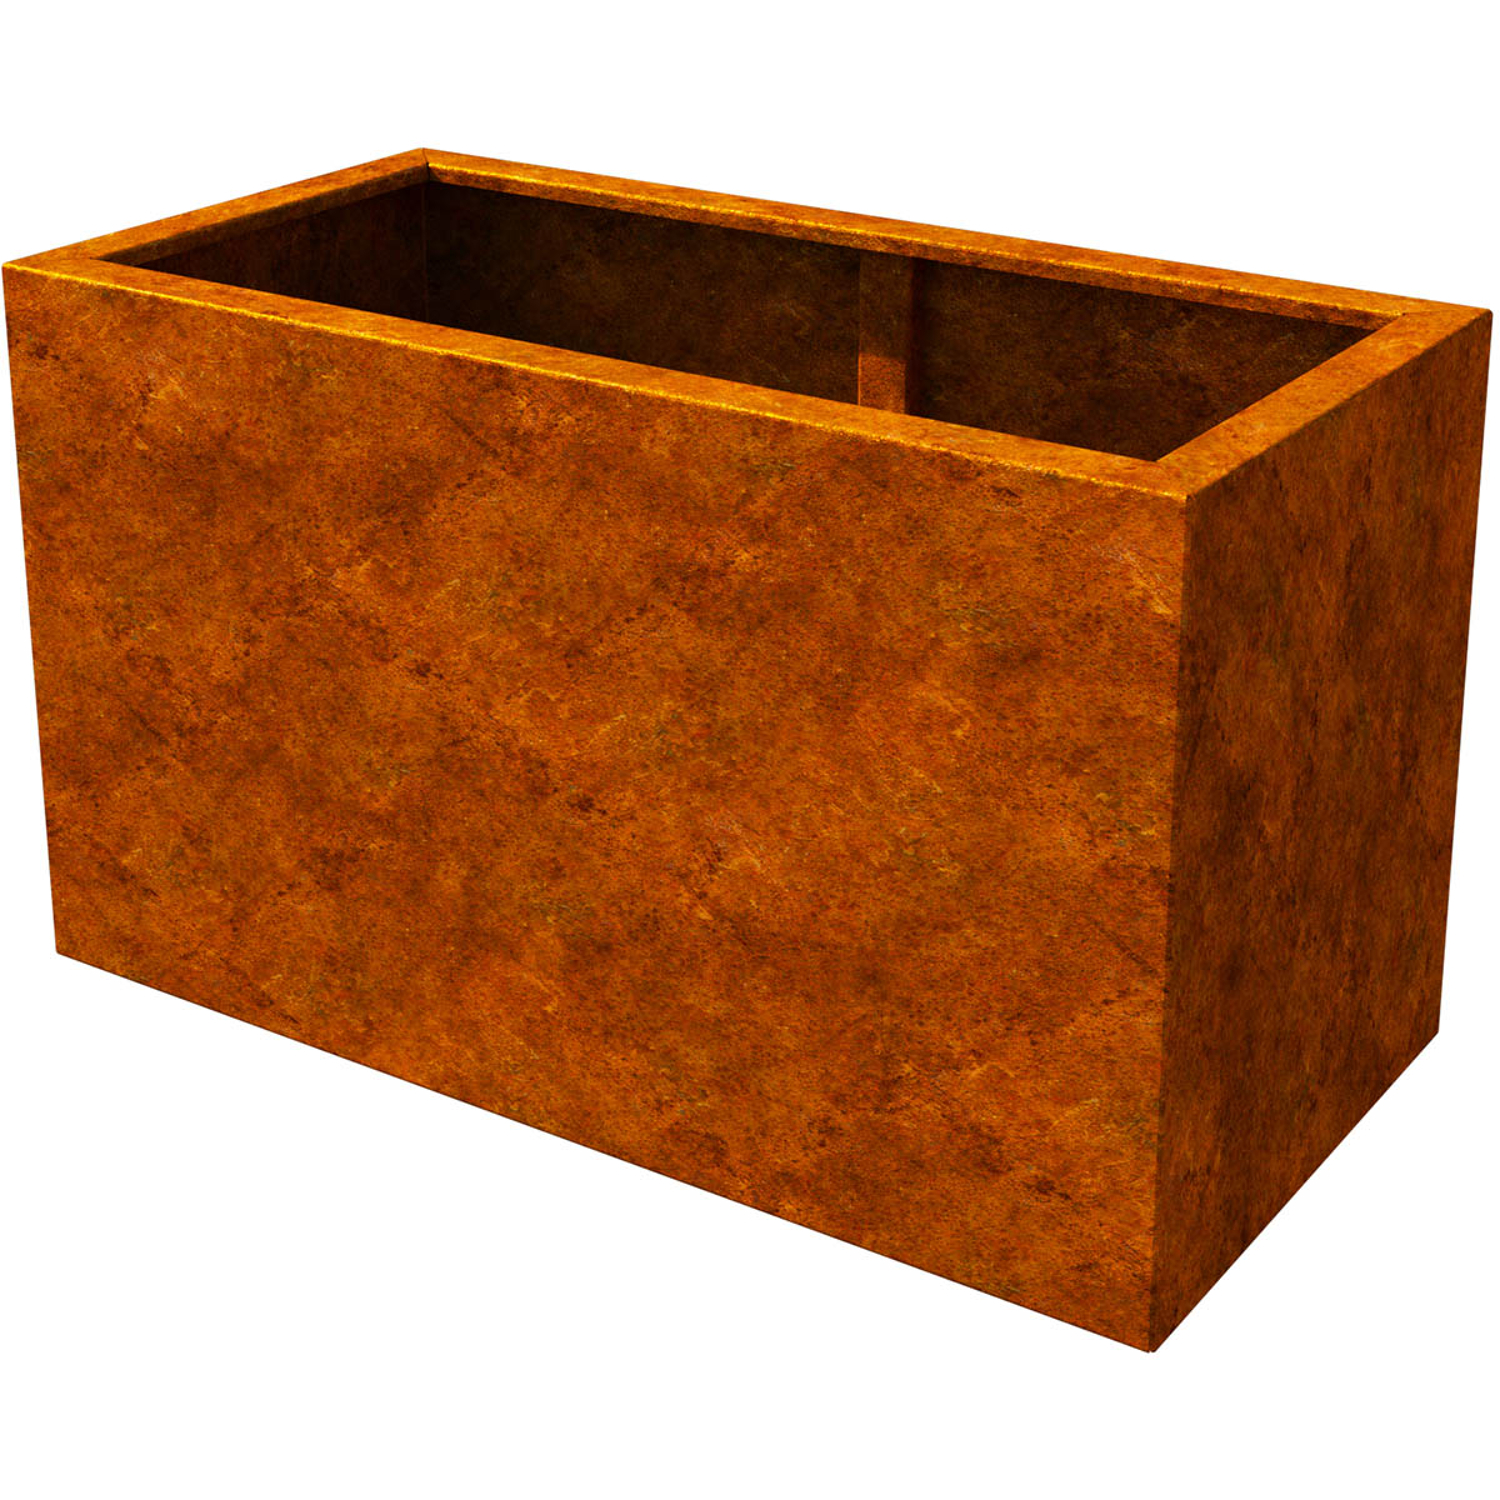 FOREST STYLE - Bac rectangulaire 99x49cm CORTEN